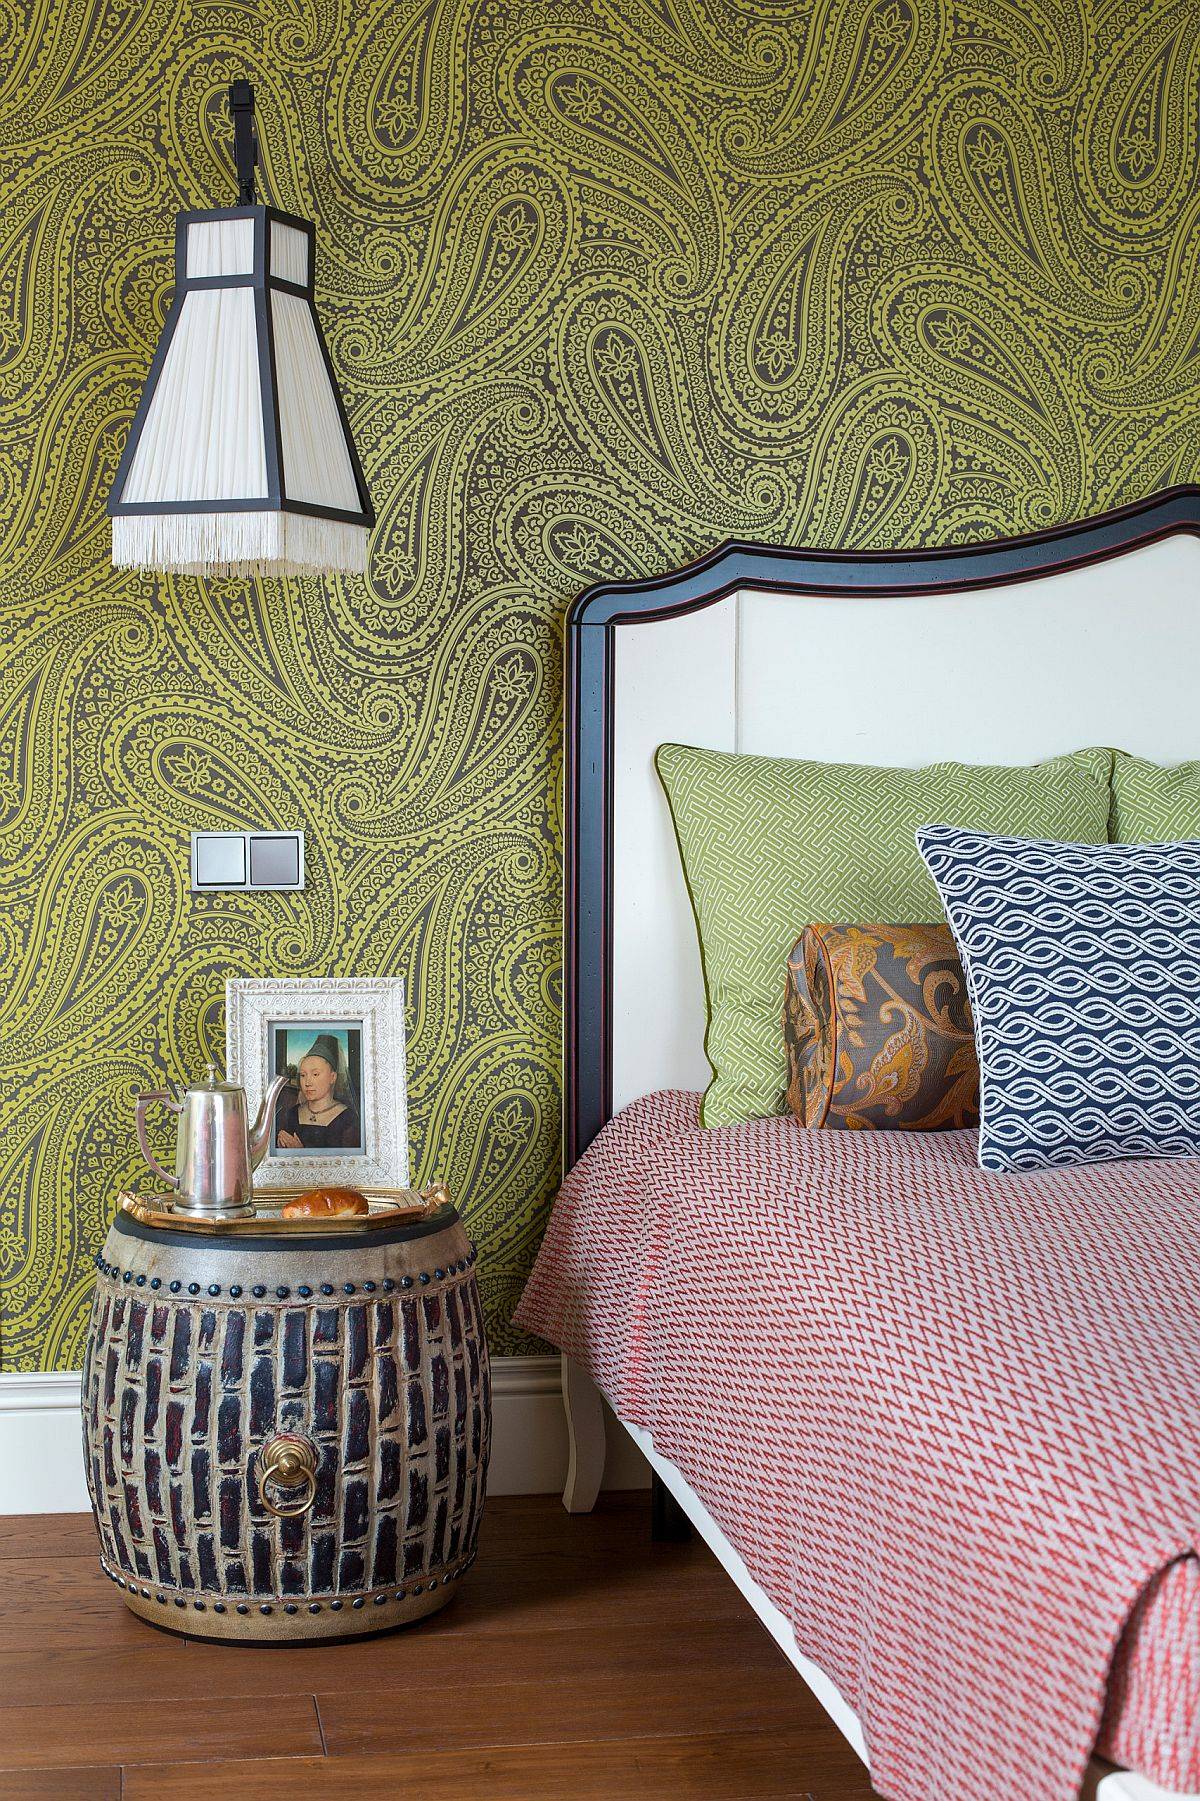 Lovely-green-wallpaper-in-Paisley-pattern-brings-both-color-and-contrast-to-this-urbane